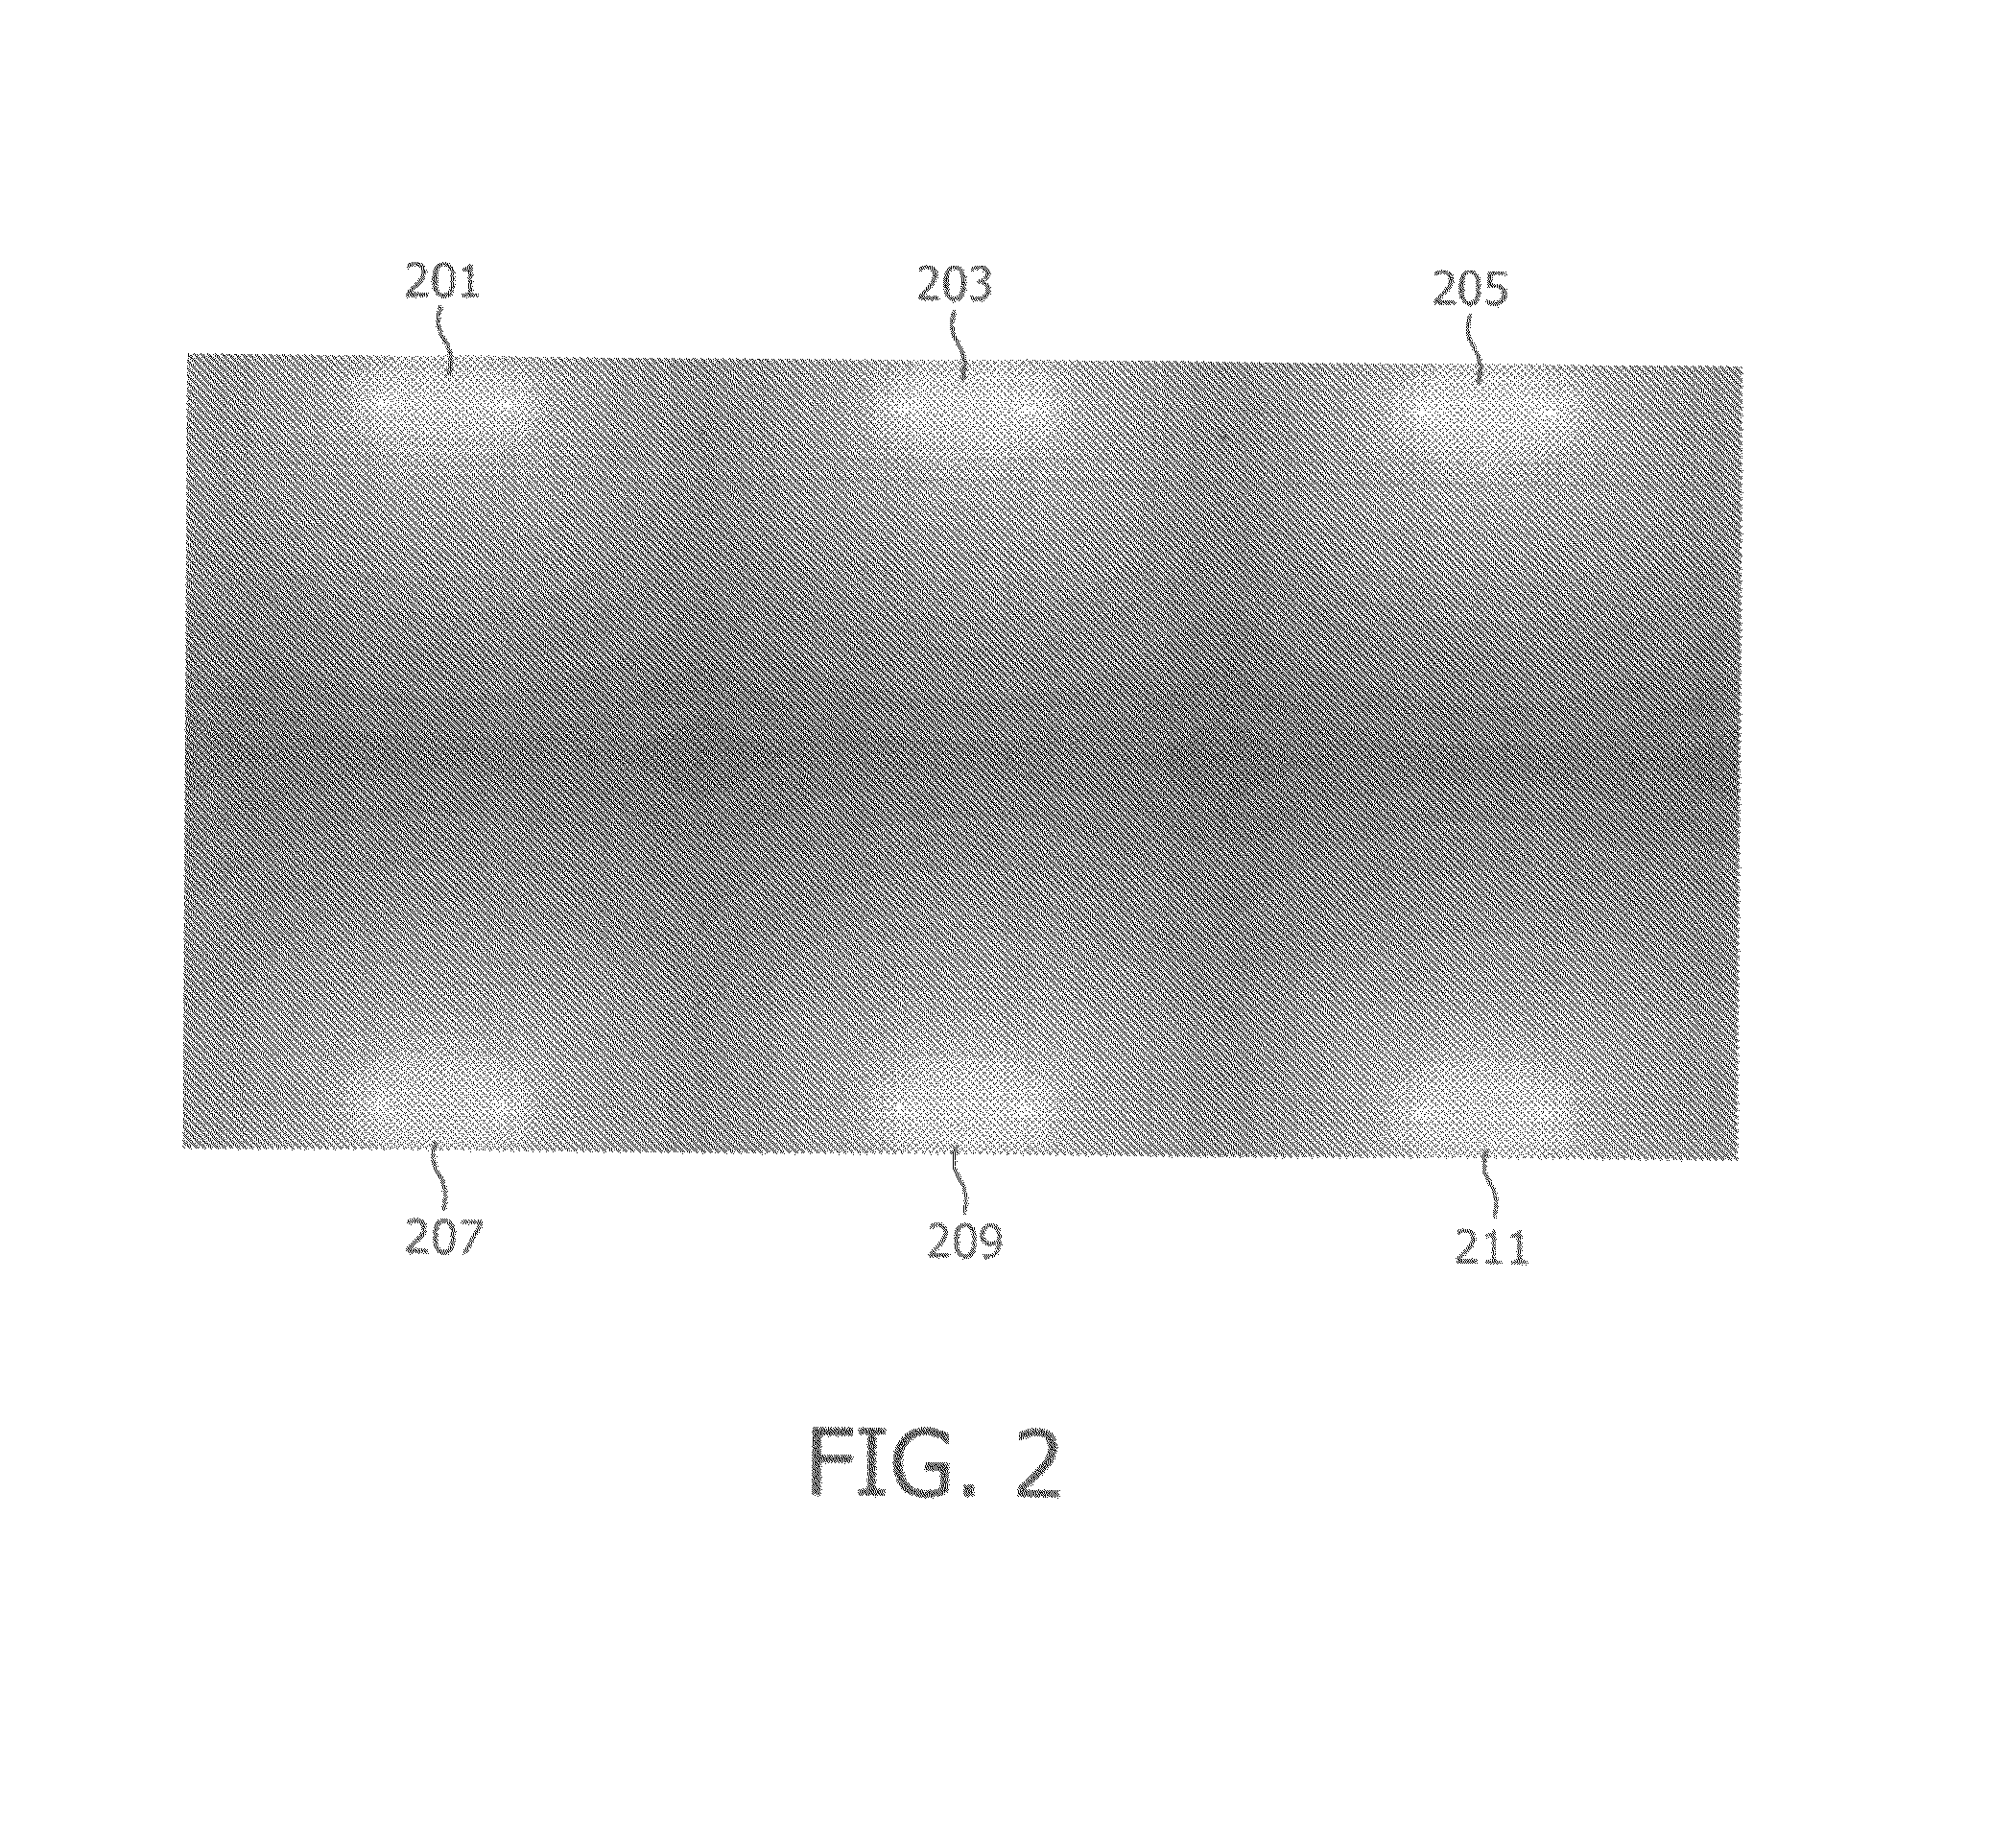 Coil element selection device for selecting elements of a receiver coil array of a magnetic resonance imaging device